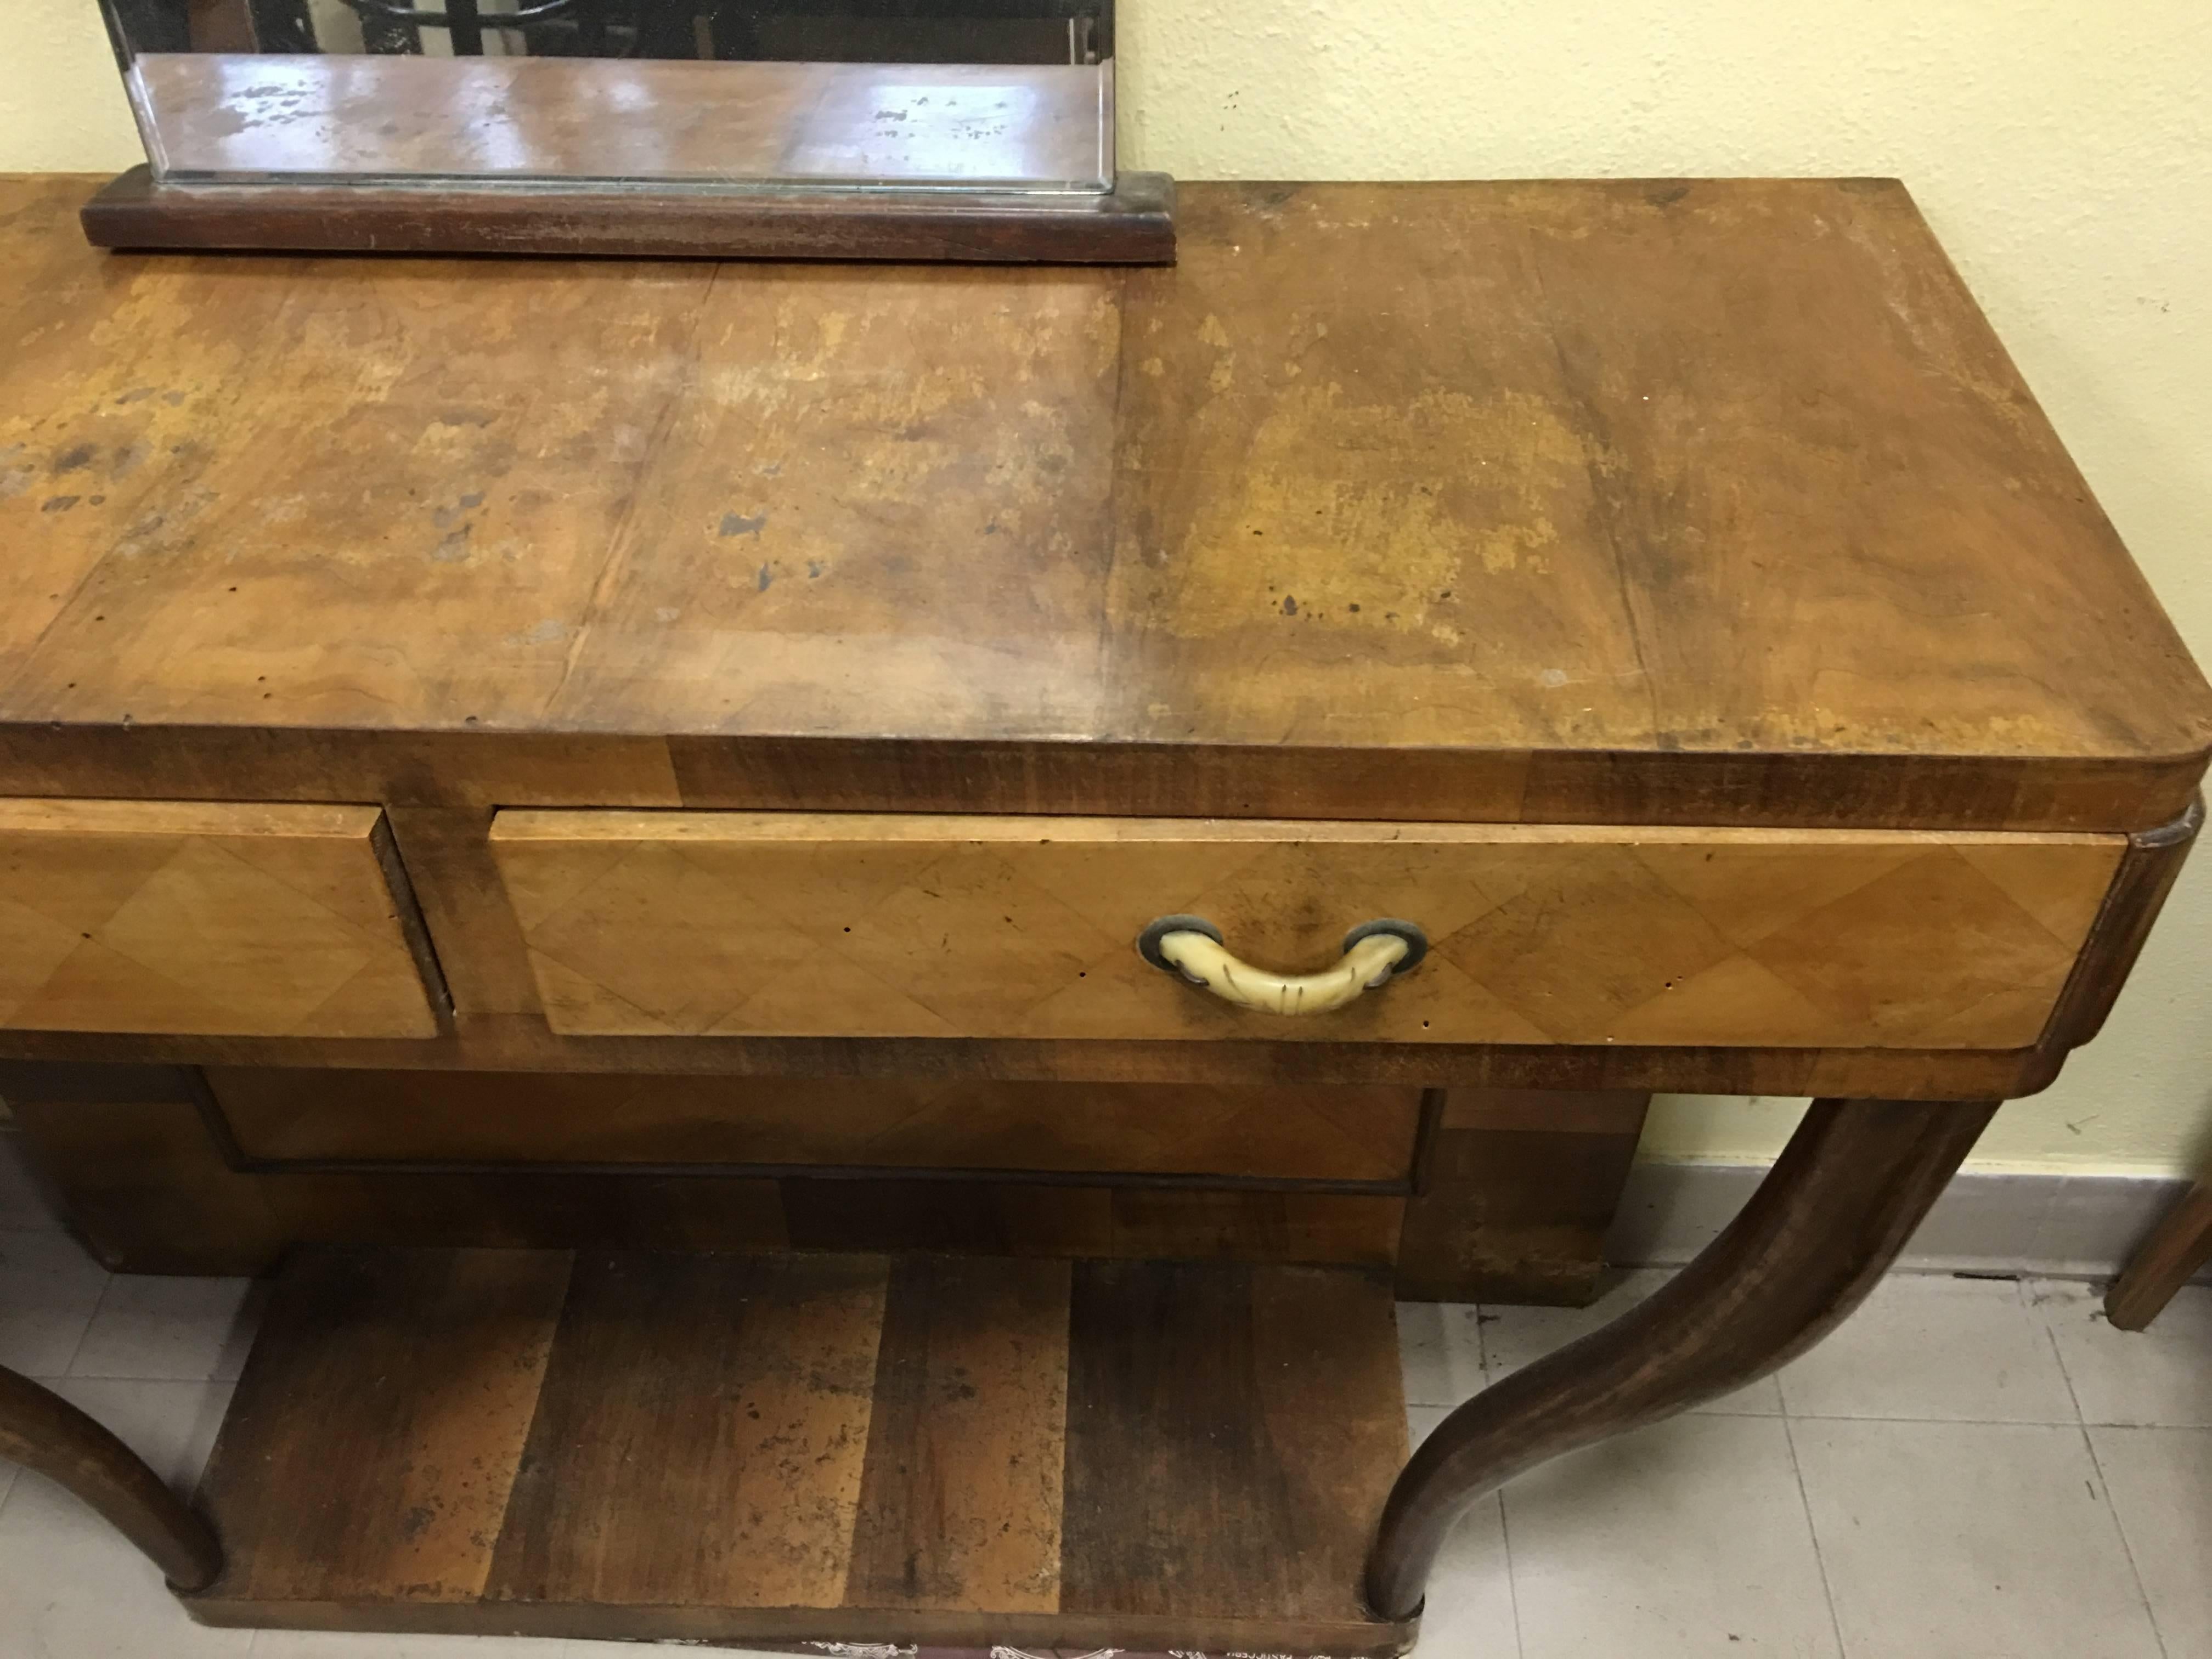 Italian briarwood console from the 1940s with two drawers and beautiful shaped handles. The mirror is removable. In good condition for the price, some marks and defects due to normal use over time.